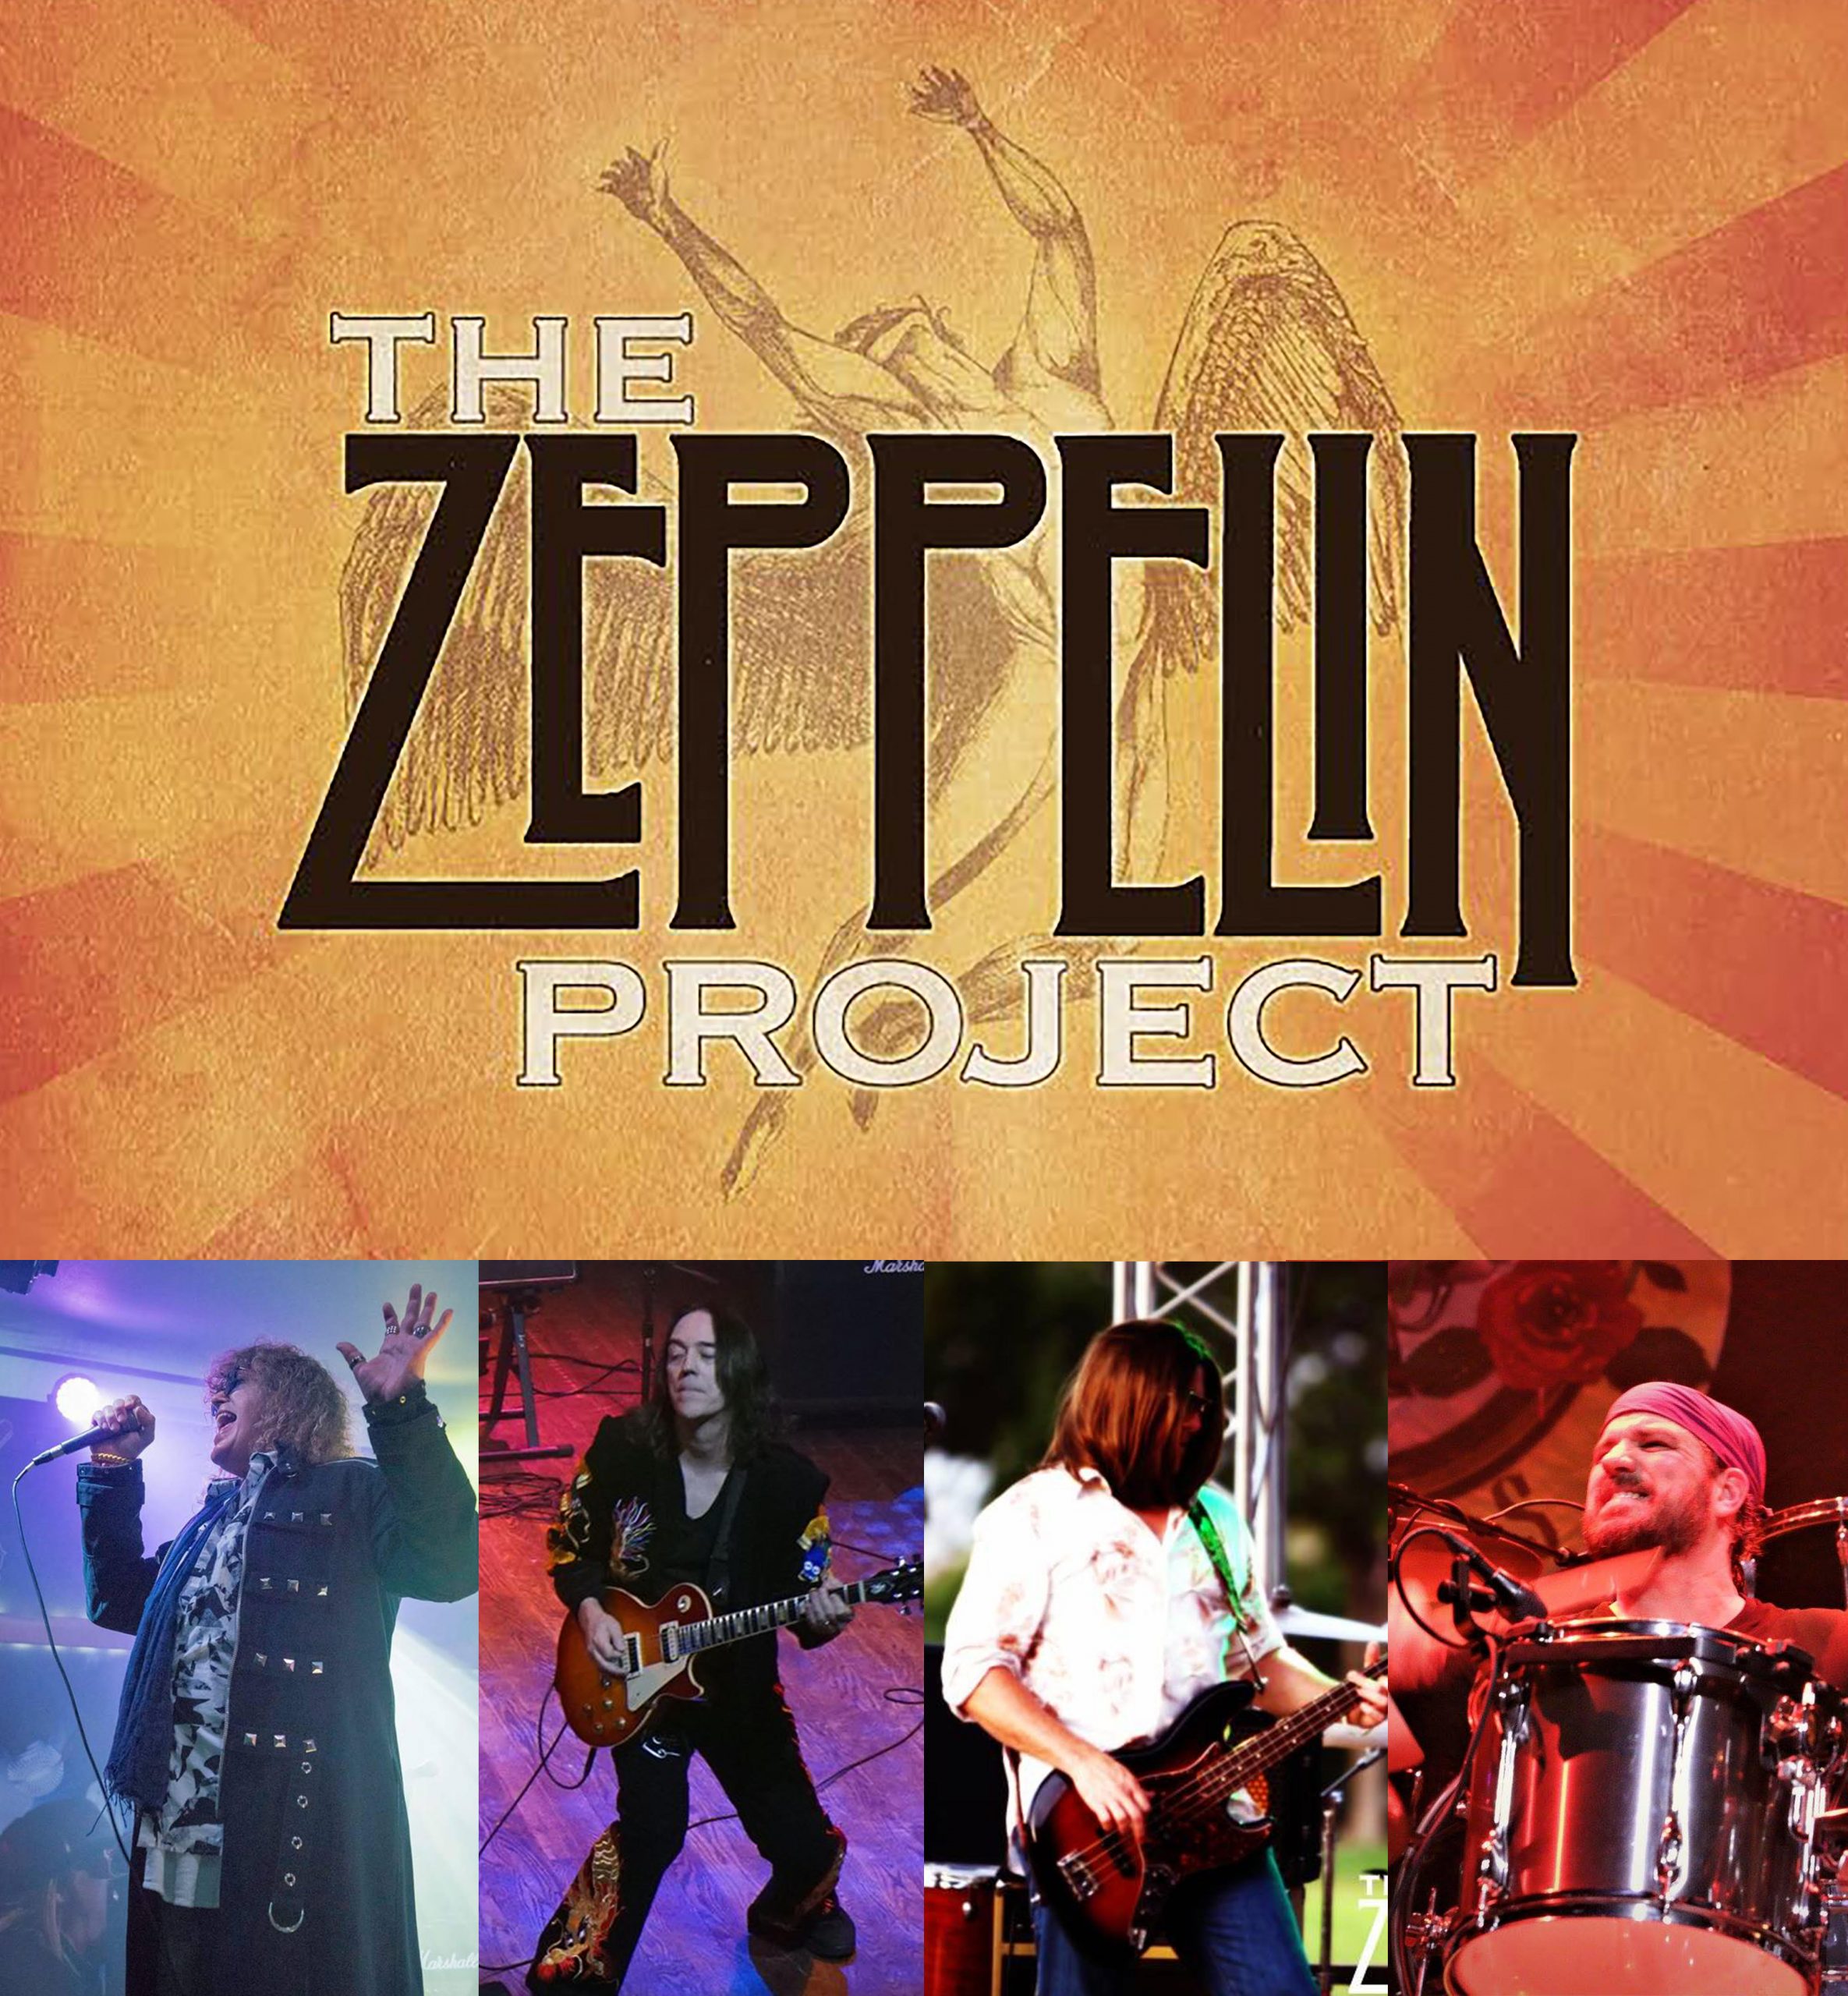 The Zeppelin Project o/a C4